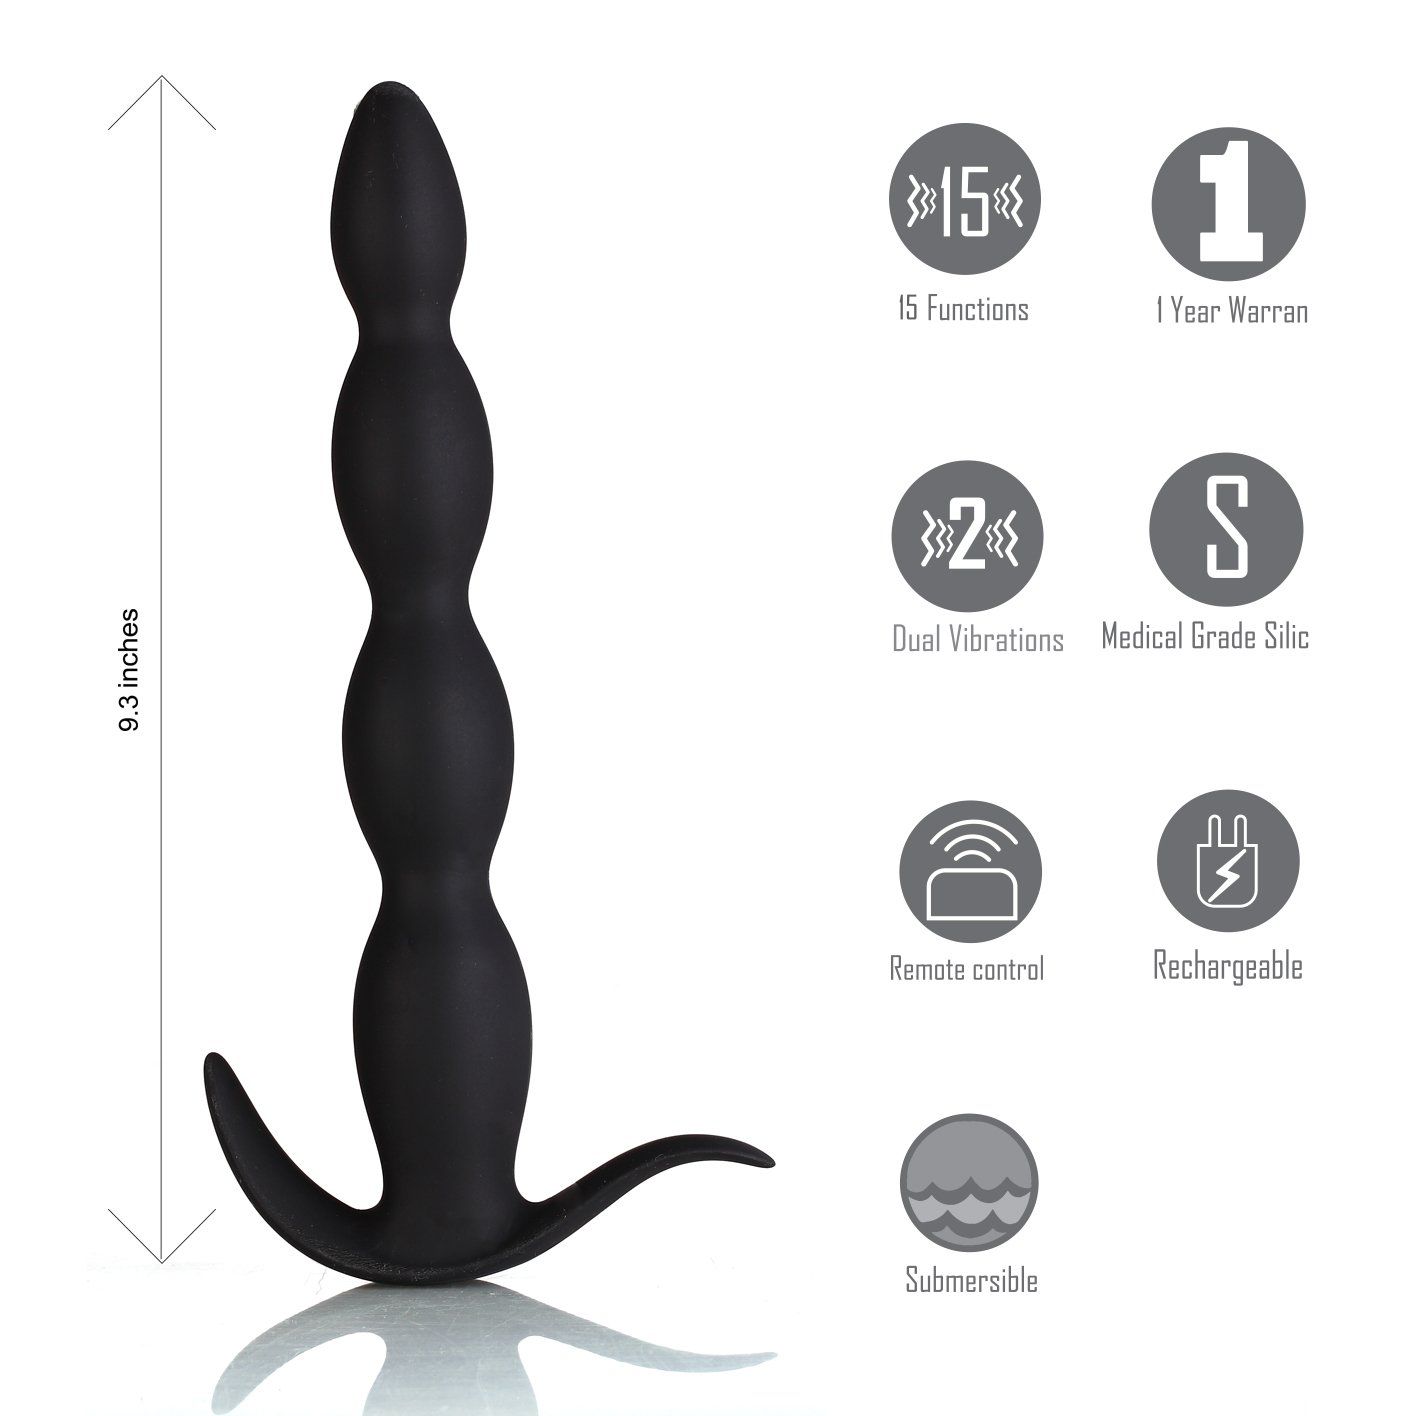 Maia mason - remote controlled anal beads - Product front view, with specifications  | Flirtybay.com.au